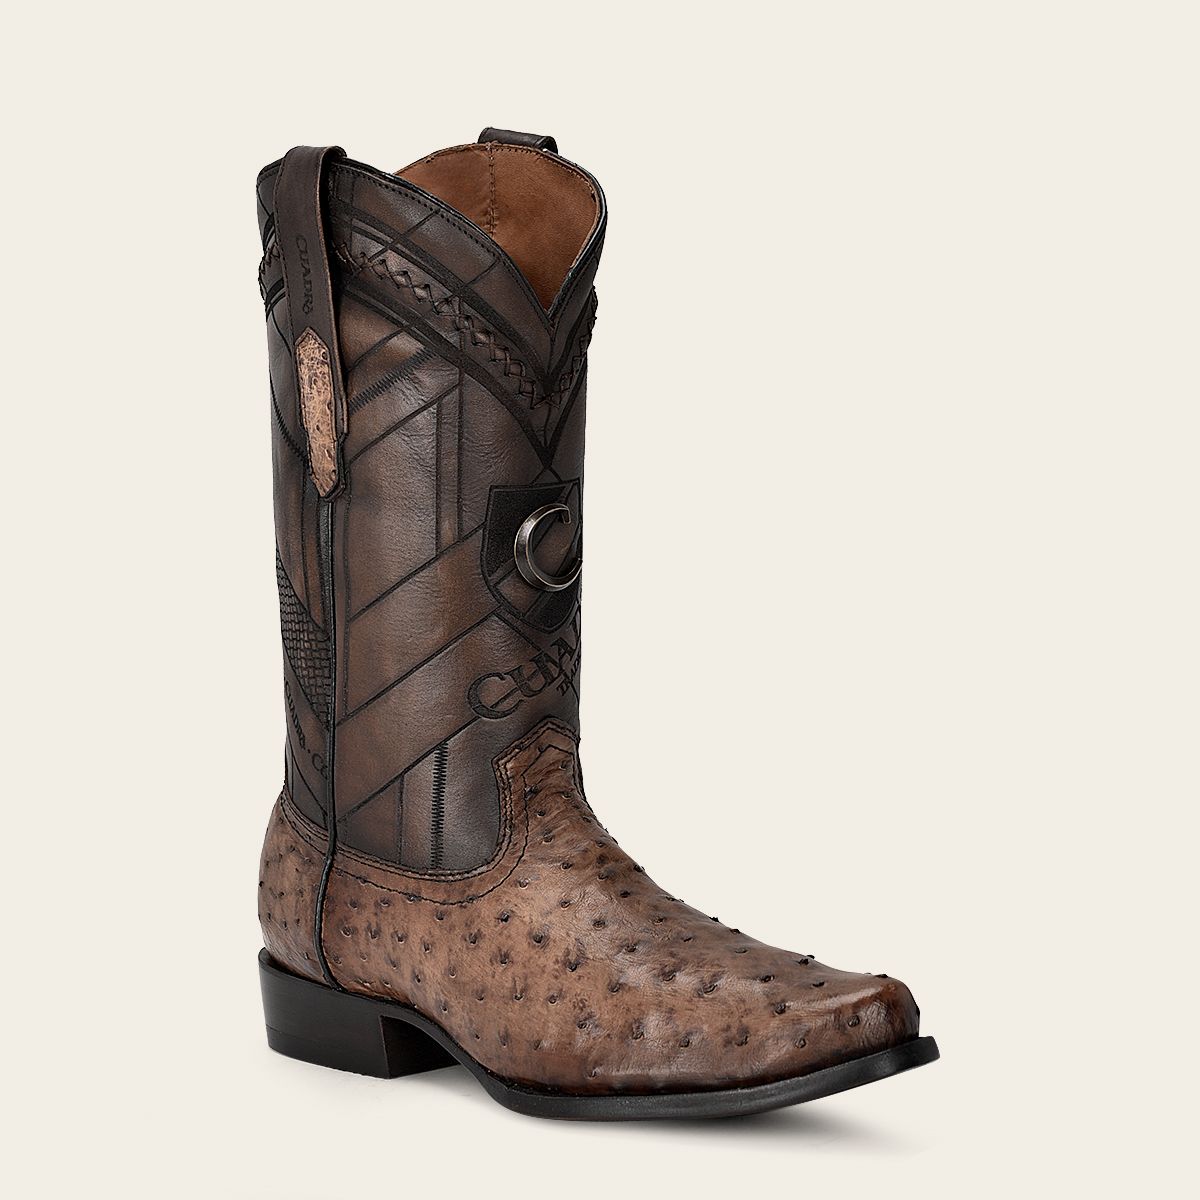 Engraved brown ostrich leather western boot - S42FA1 - Cuadra Shop